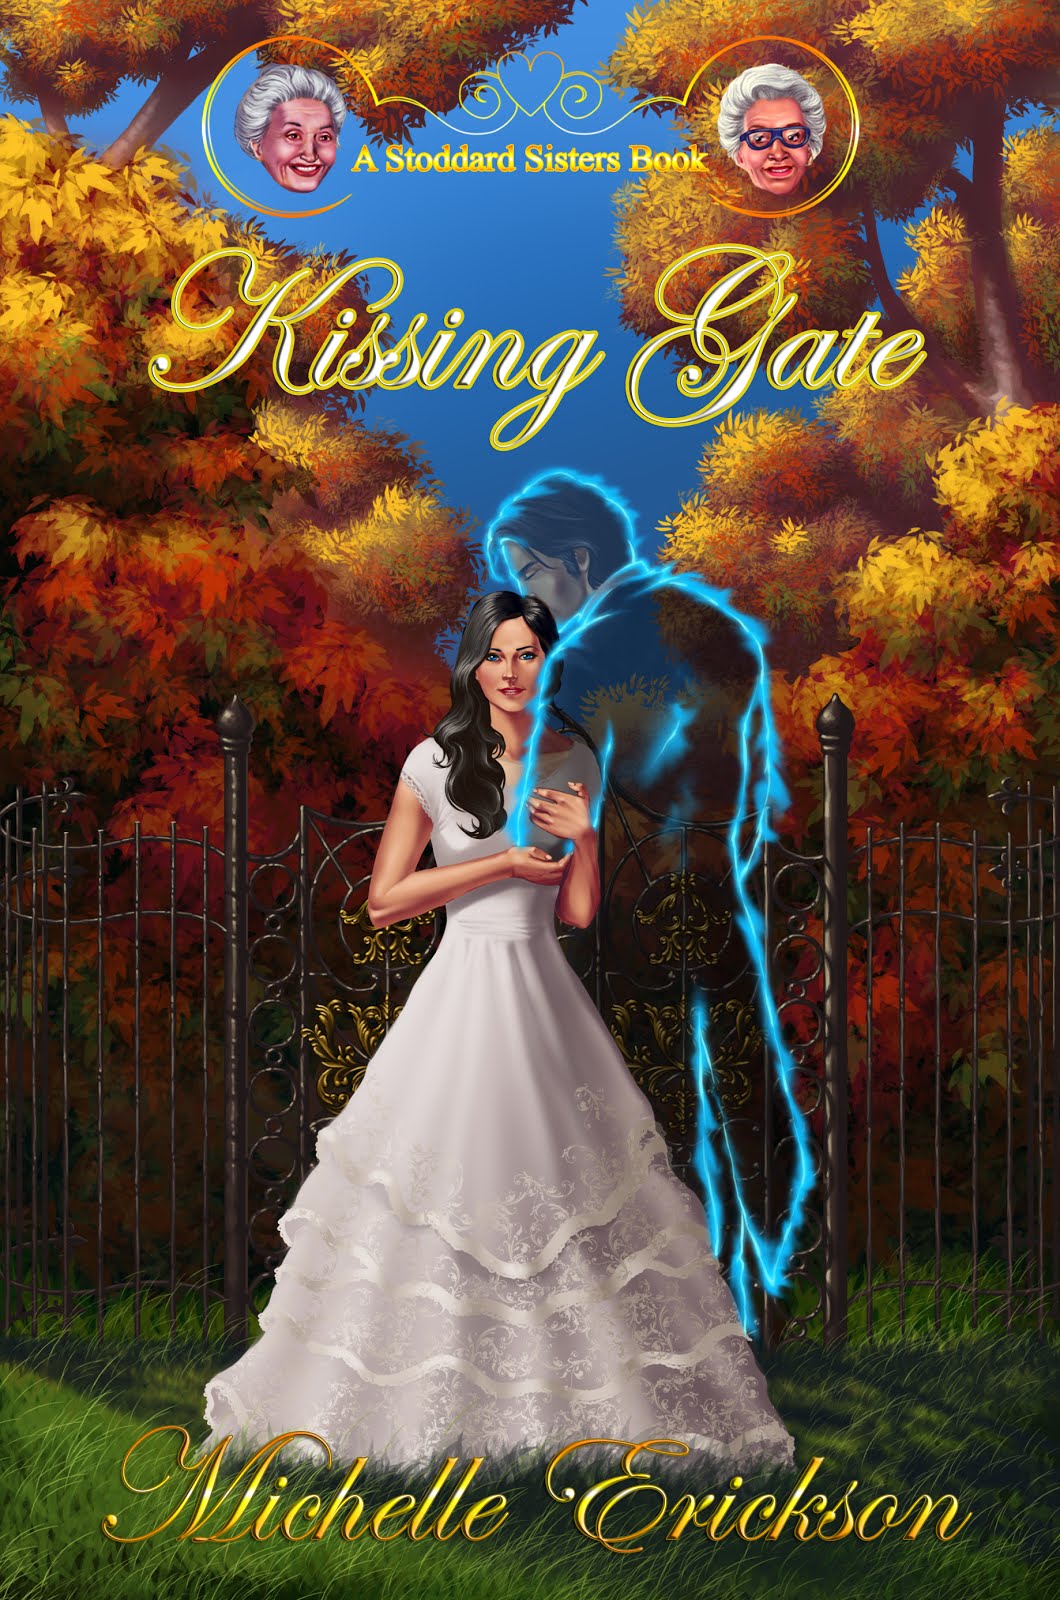 Kissing Gate:  A Stoddard Sisters Book